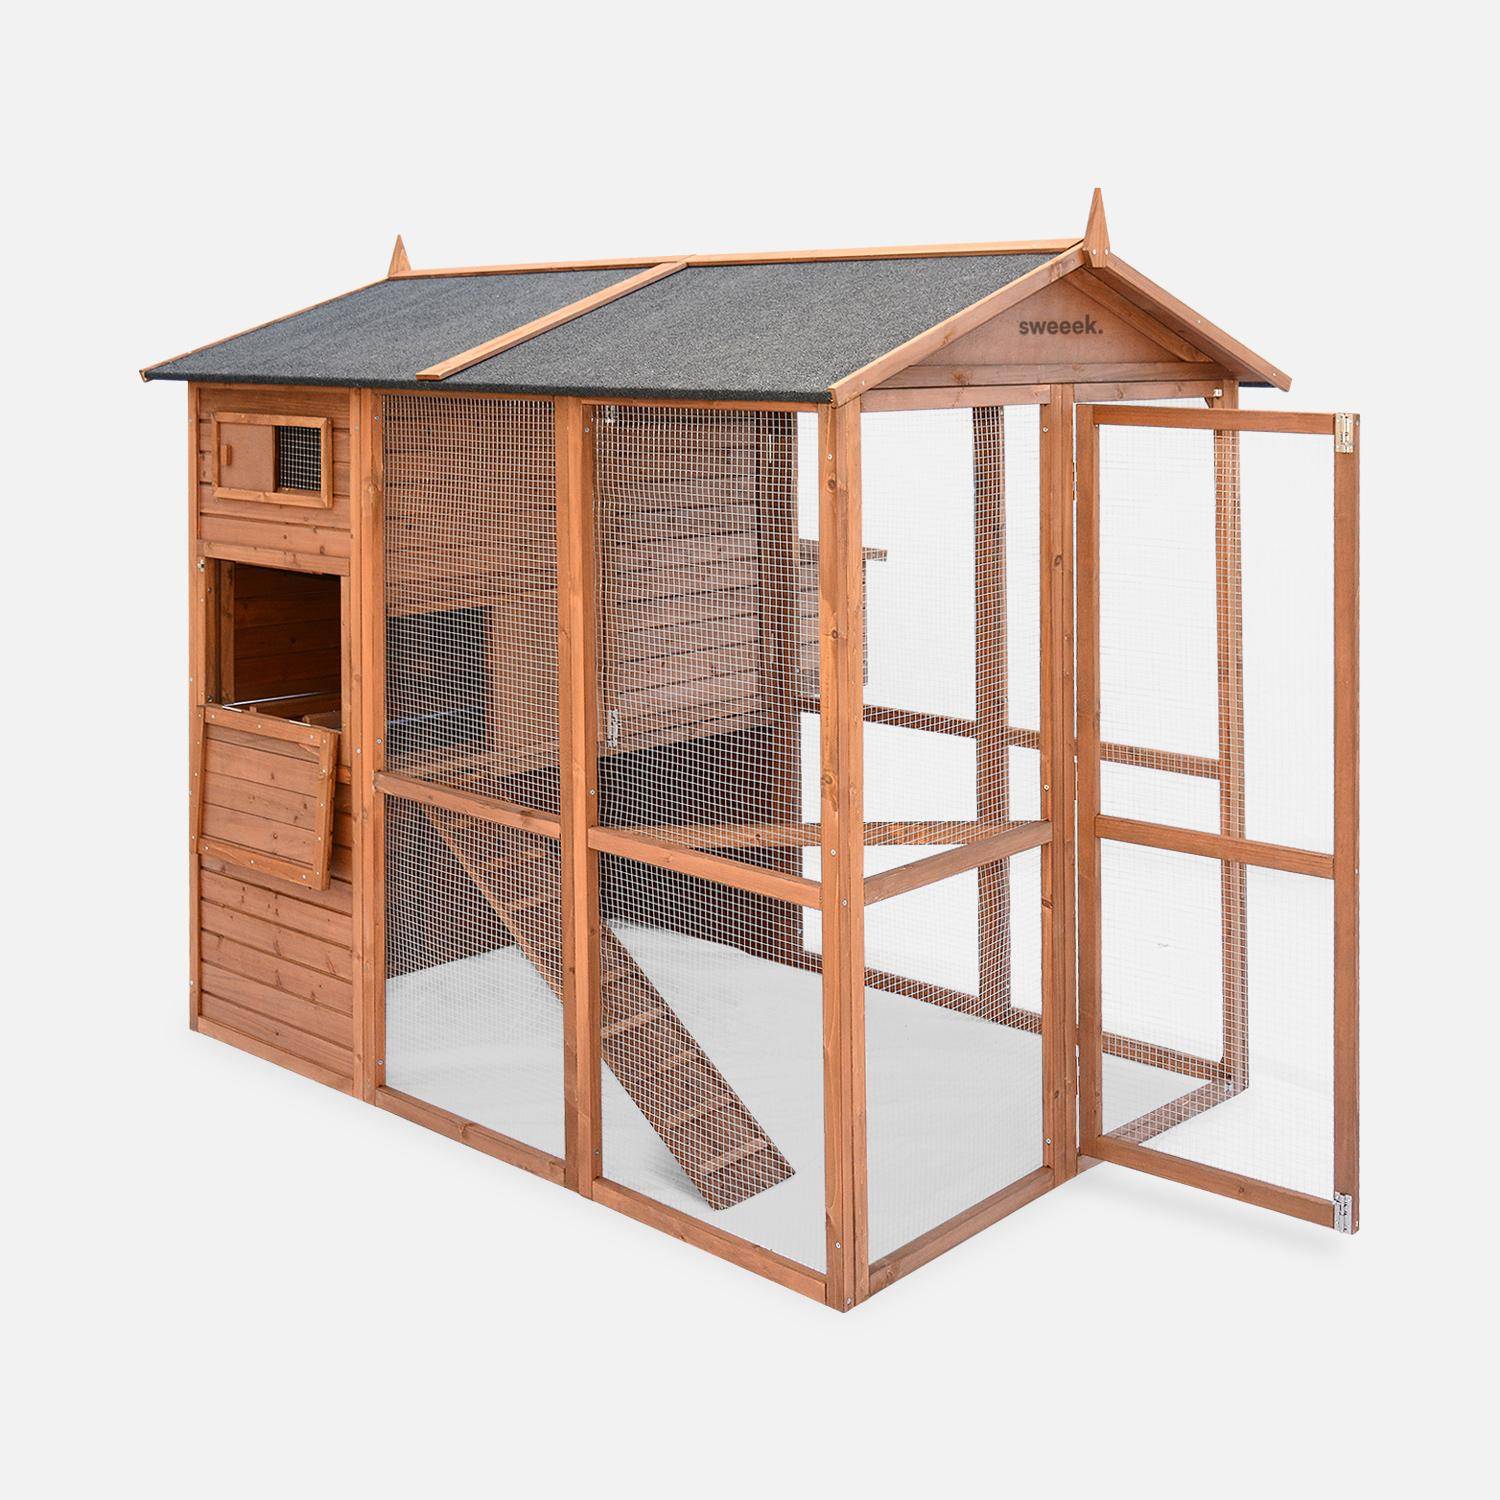 Wooden chicken coop - backyard hen cage for 6 to 8 chickens, indoor and outdoor space - Cotentine - Wood colour Photo5